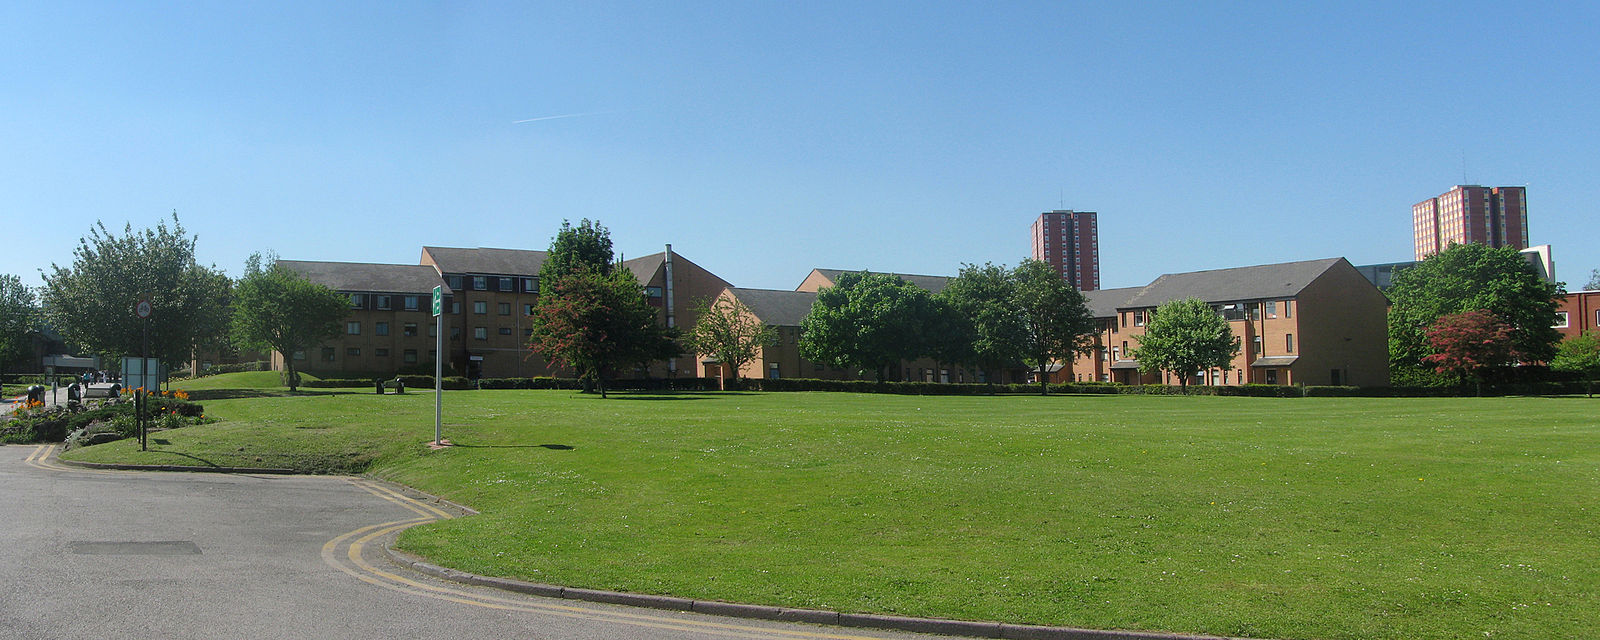 Constantine court, which has now been demolished